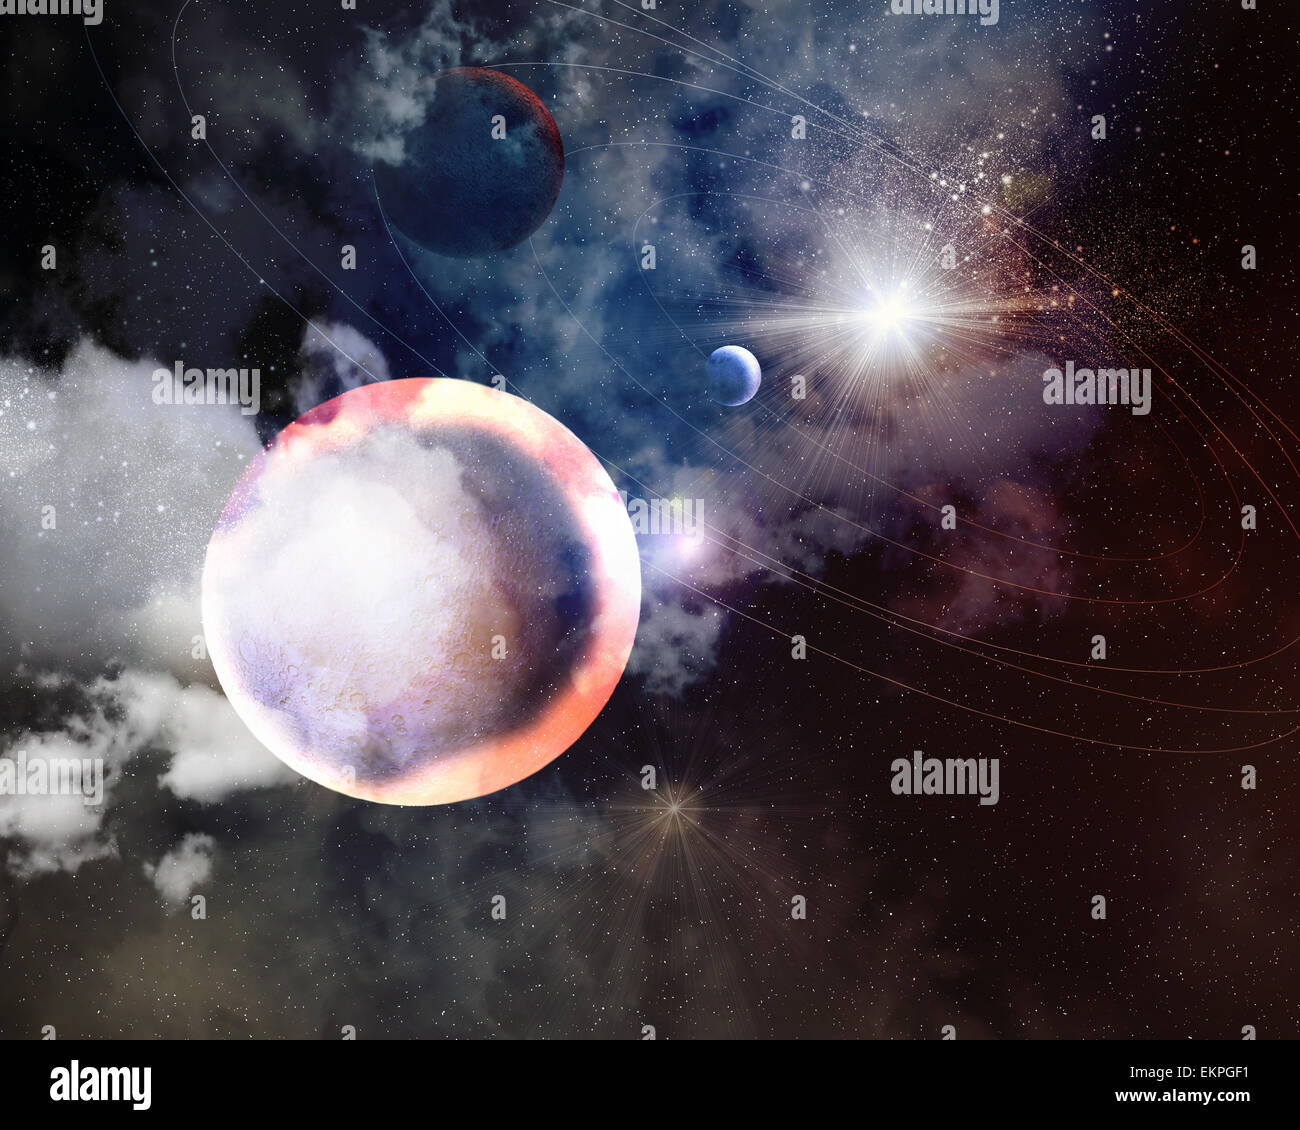 Image of planets in space Stock Photo